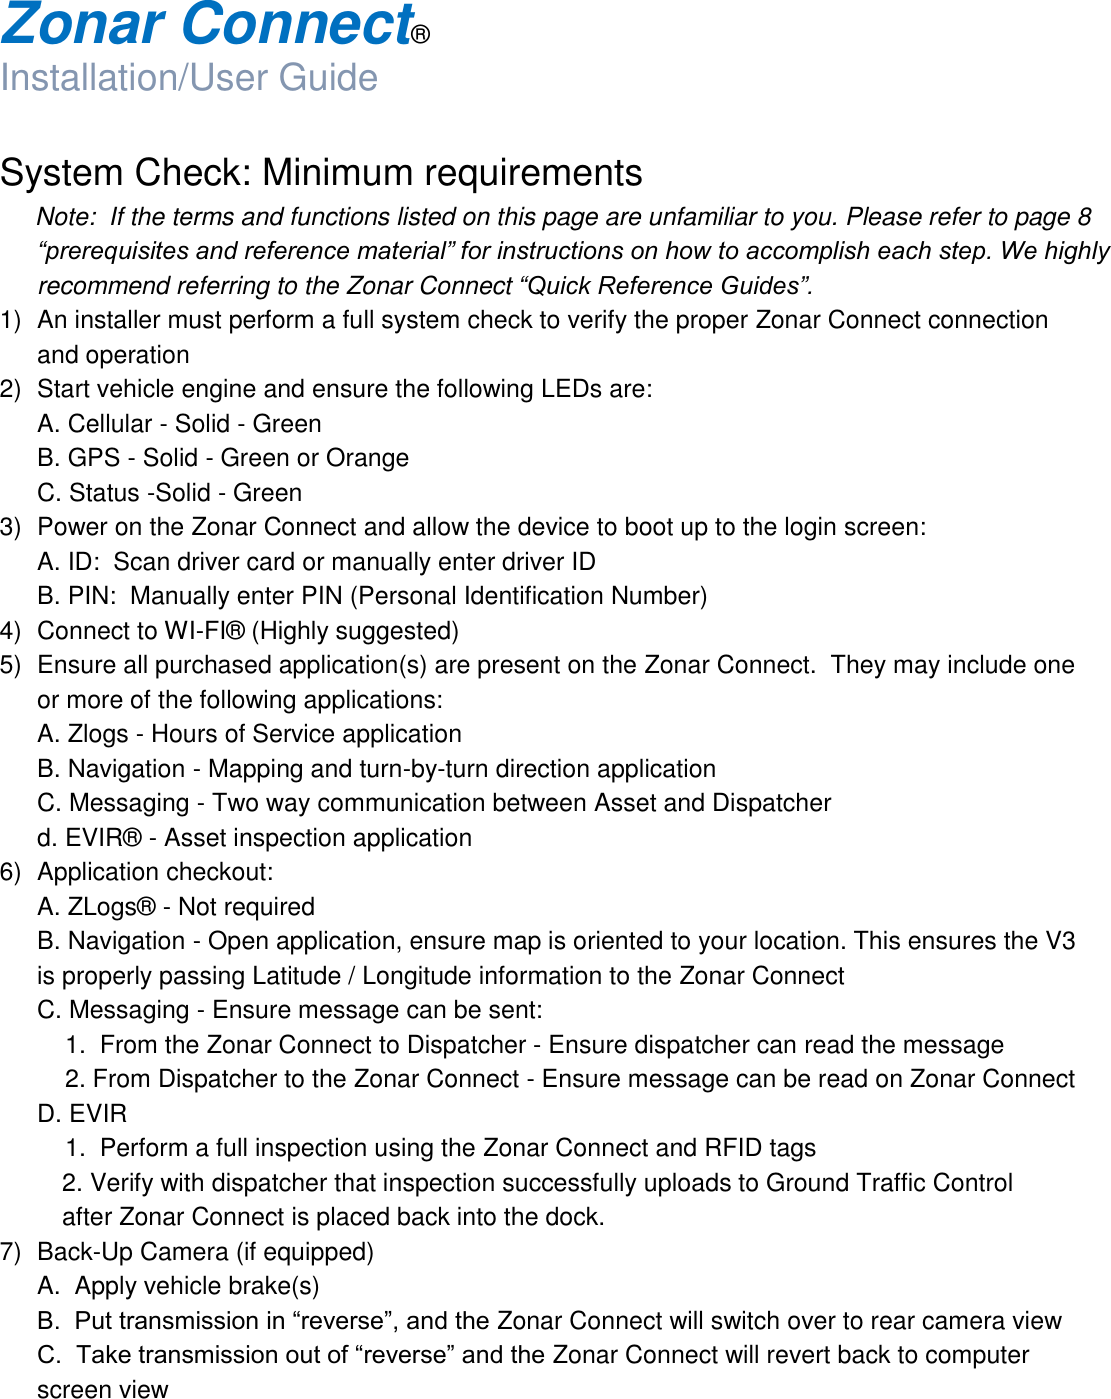  Zonar Connect®  Installation/User Guide  System Check: Minimum requirements Note:  If the terms and functions listed on this page are unfamiliar to you. Please refer to page 8 “prerequisites and reference material” for instructions on how to accomplish each step. We highly recommend referring to the Zonar Connect “Quick Reference Guides”. 1)  An installer must perform a full system check to verify the proper Zonar Connect connection and operation 2)  Start vehicle engine and ensure the following LEDs are:   A. Cellular - Solid - Green   B. GPS - Solid - Green or Orange   C. Status -Solid - Green 3)  Power on the Zonar Connect and allow the device to boot up to the login screen:   A. ID:  Scan driver card or manually enter driver ID   B. PIN:  Manually enter PIN (Personal Identification Number) 4)  Connect to WI-FI®  (Highly suggested) 5)  Ensure all purchased application(s) are present on the Zonar Connect.  They may include one or more of the following applications:   A. Zlogs - Hours of Service application   B. Navigation - Mapping and turn-by-turn direction application   C. Messaging - Two way communication between Asset and Dispatcher   d. EVIR®  - Asset inspection application 6)  Application checkout:   A. ZLogs®  - Not required   B. Navigation - Open application, ensure map is oriented to your location. This ensures the V3 is properly passing Latitude / Longitude information to the Zonar Connect   C. Messaging - Ensure message can be sent:      1.  From the Zonar Connect to Dispatcher - Ensure dispatcher can read the message      2. From Dispatcher to the Zonar Connect - Ensure message can be read on Zonar Connect   D. EVIR      1.  Perform a full inspection using the Zonar Connect and RFID tags 2. Verify with dispatcher that inspection successfully uploads to Ground Traffic Control                   after Zonar Connect is placed back into the dock. 7)  Back-Up Camera (if equipped)   A.  Apply vehicle brake(s)  B.  Put transmission in “reverse”, and the Zonar Connect will switch over to rear camera view  C.  Take transmission out of “reverse” and the Zonar Connect will revert back to computer screen view 